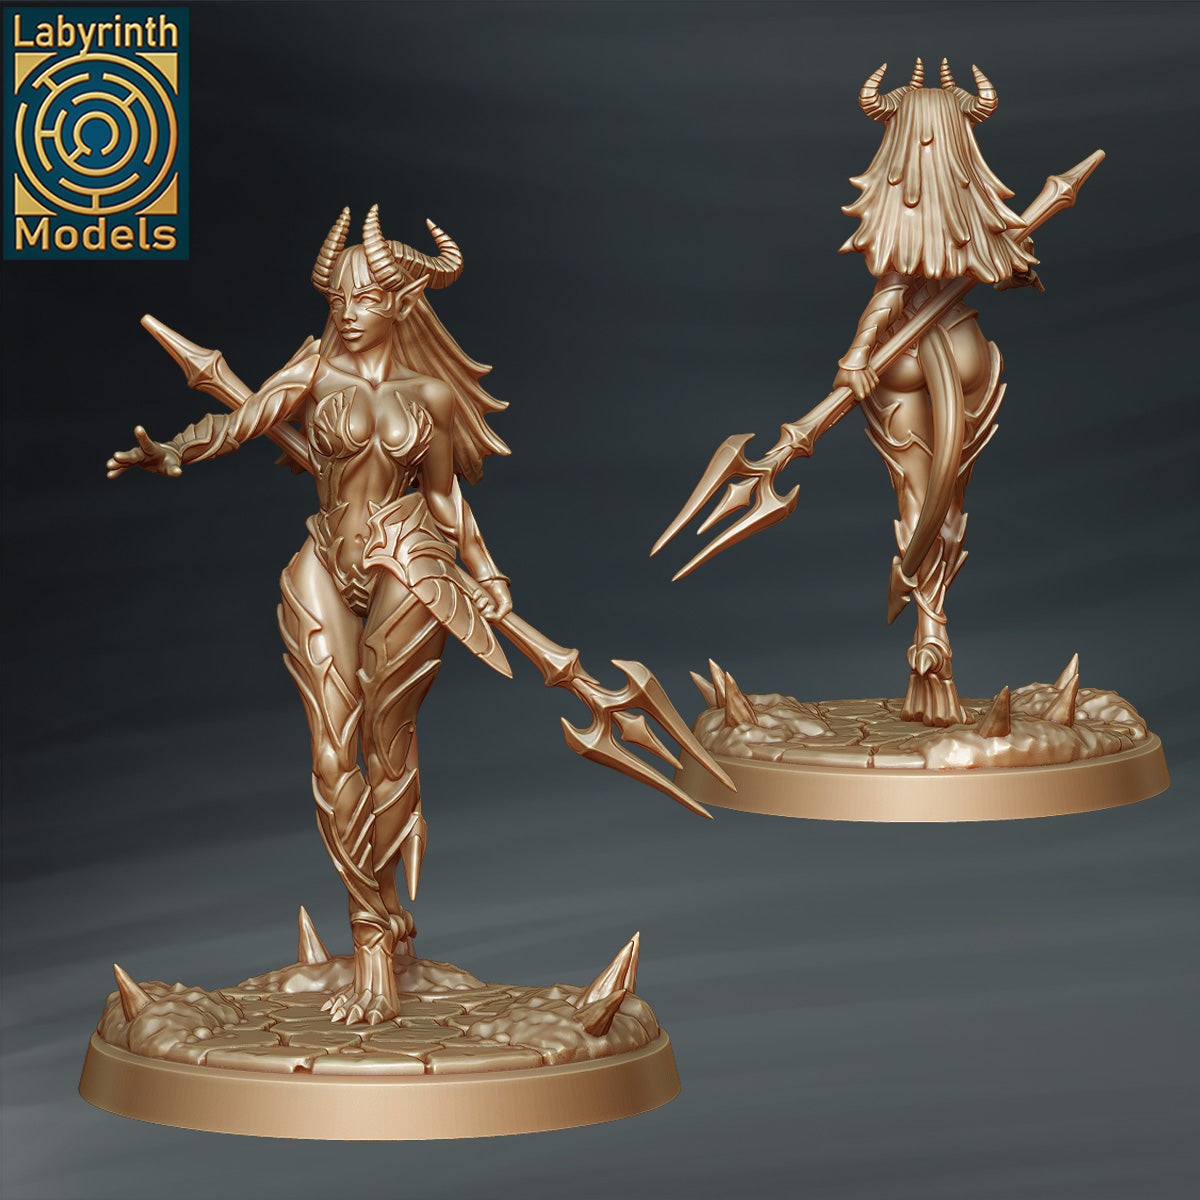 Umbral by Labyrinth Models